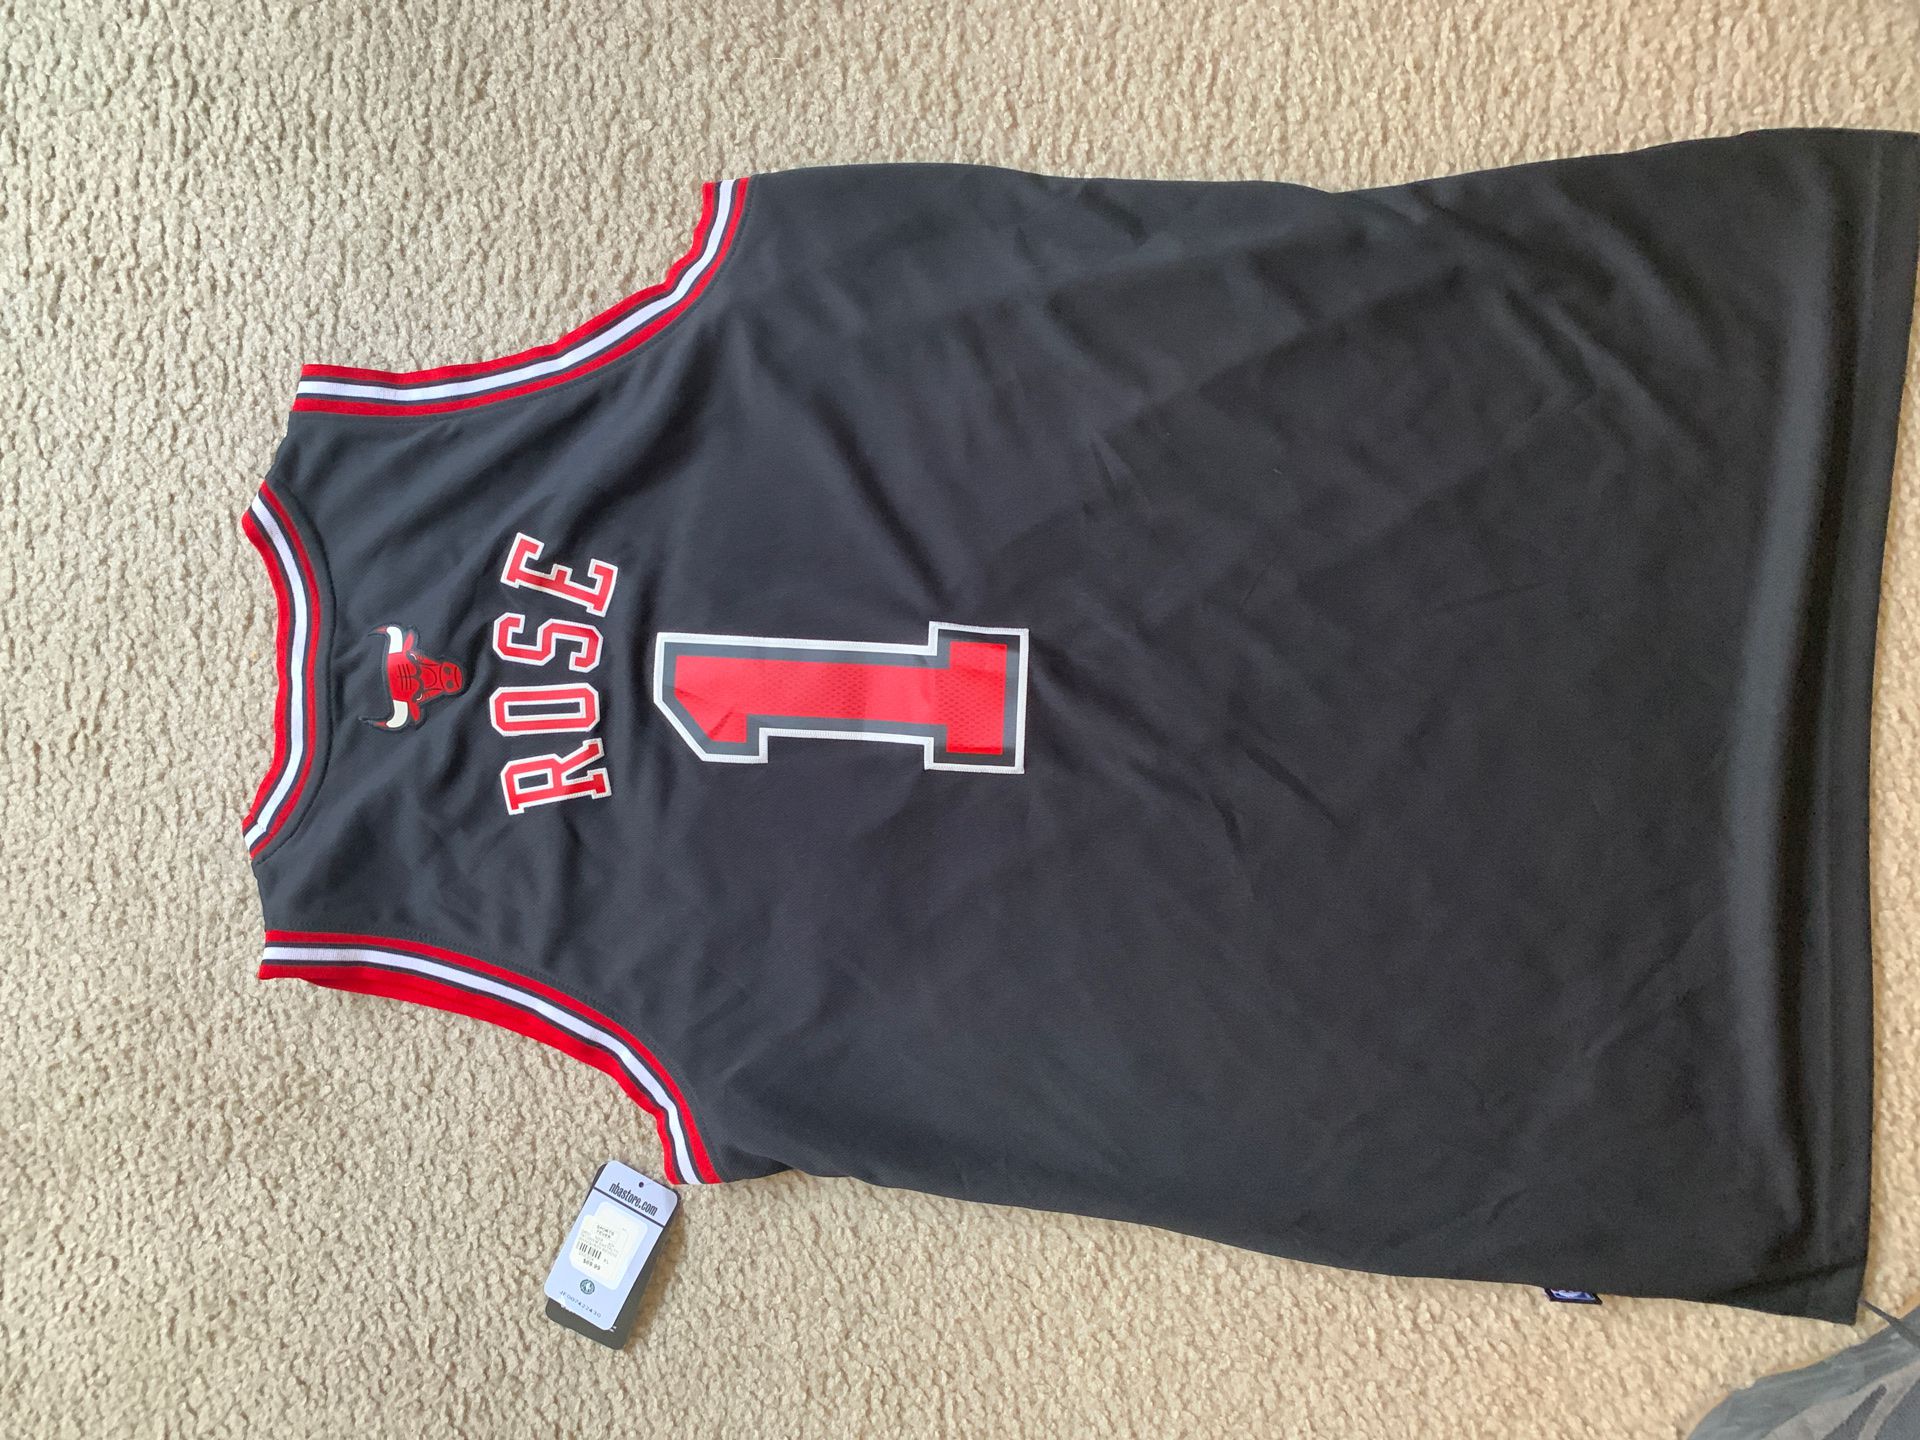 Adidas Hardwood Classic NBA Chicago Bulls Derrick Rose Jersey YOUTH MEDIUM.  for Sale in San Leandro, CA - OfferUp